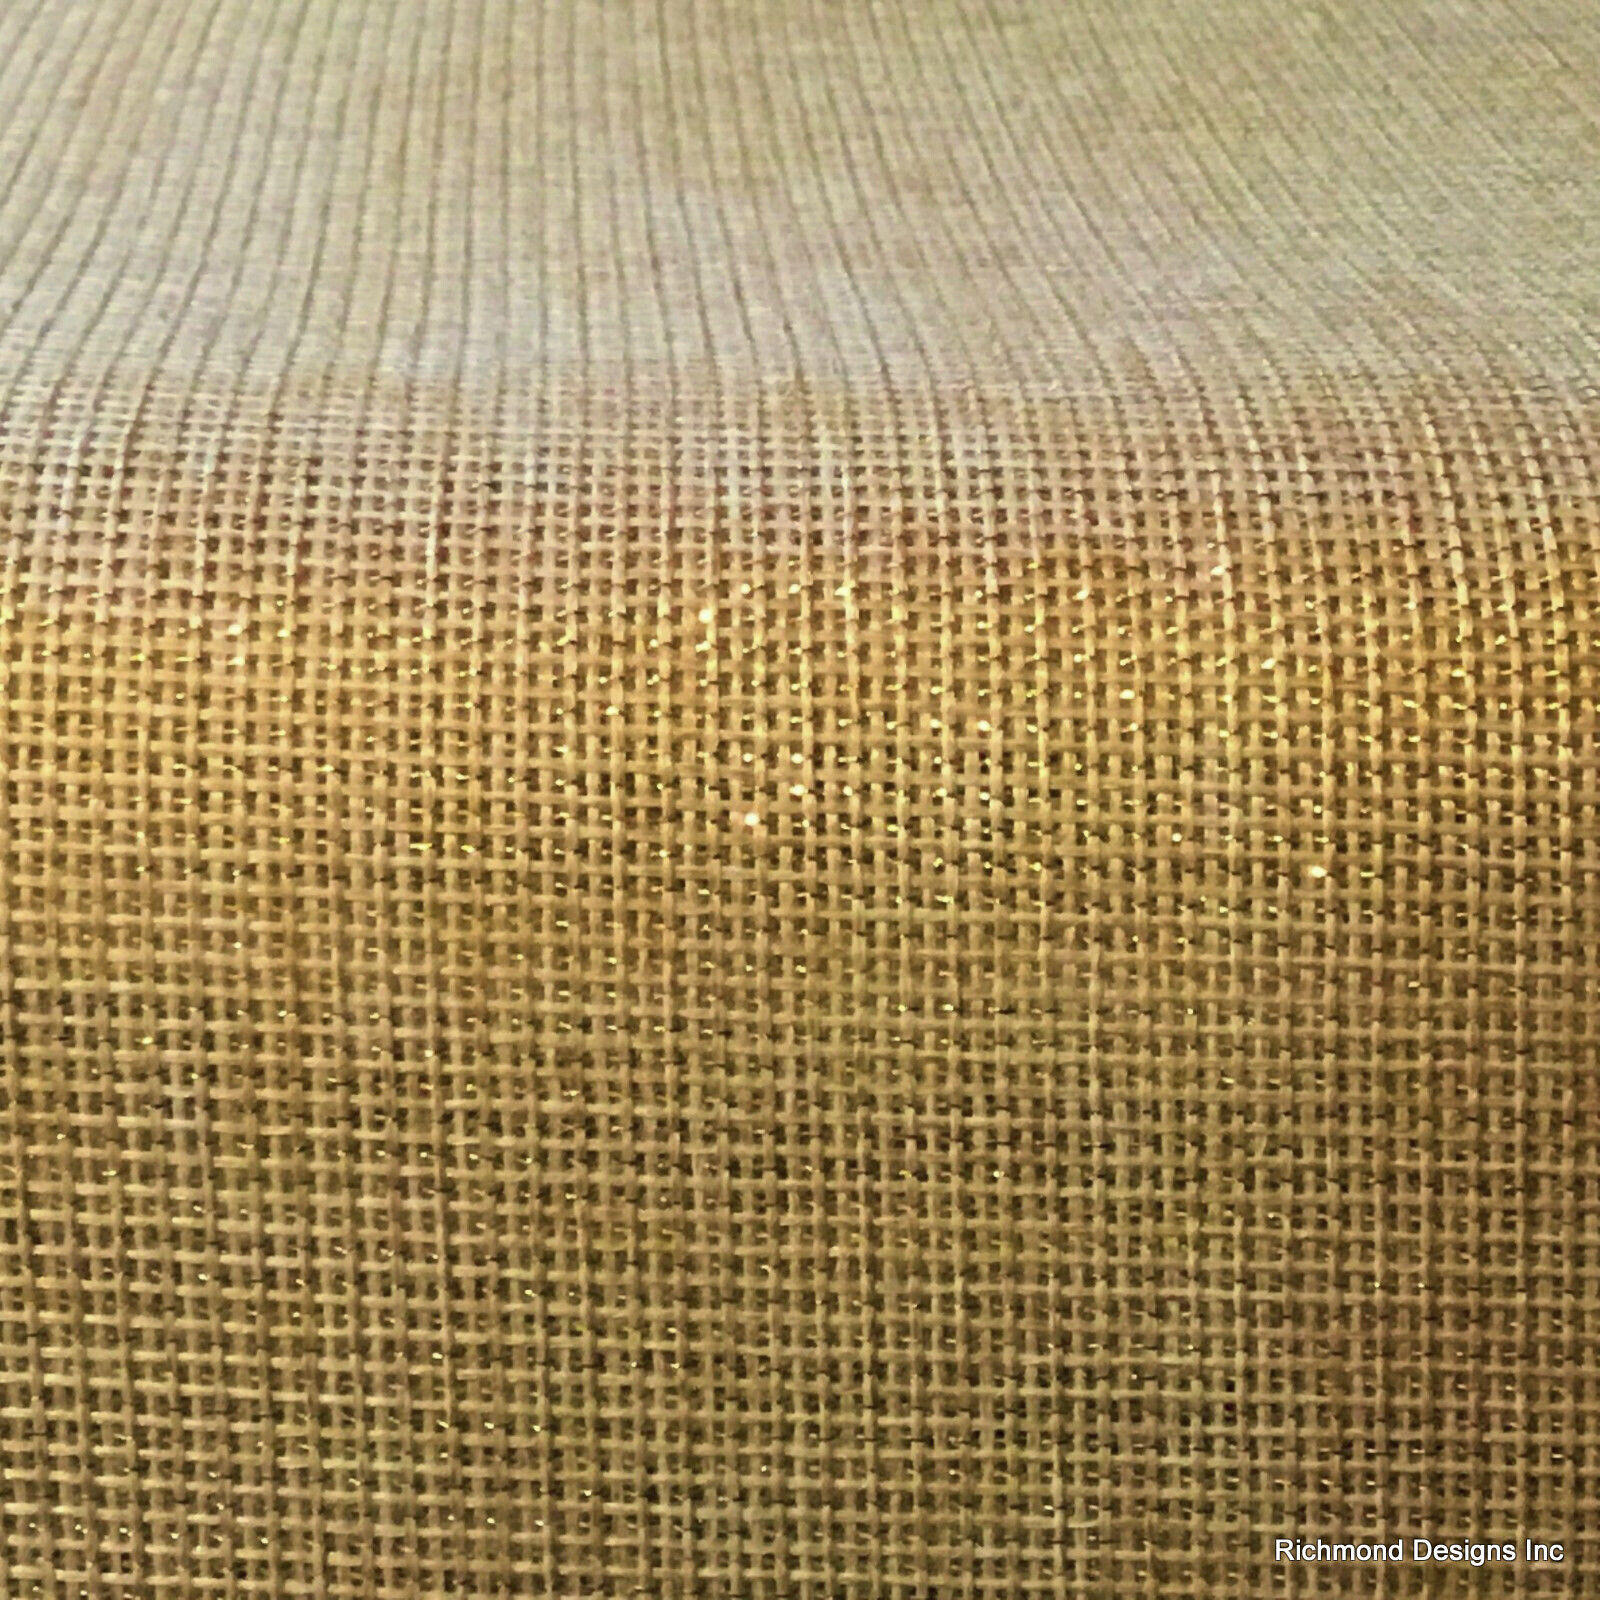 Antique Radio Grille/Speaker cloth, Gold Lurex, 2 for 1 , shipped uncut, 25”x50”